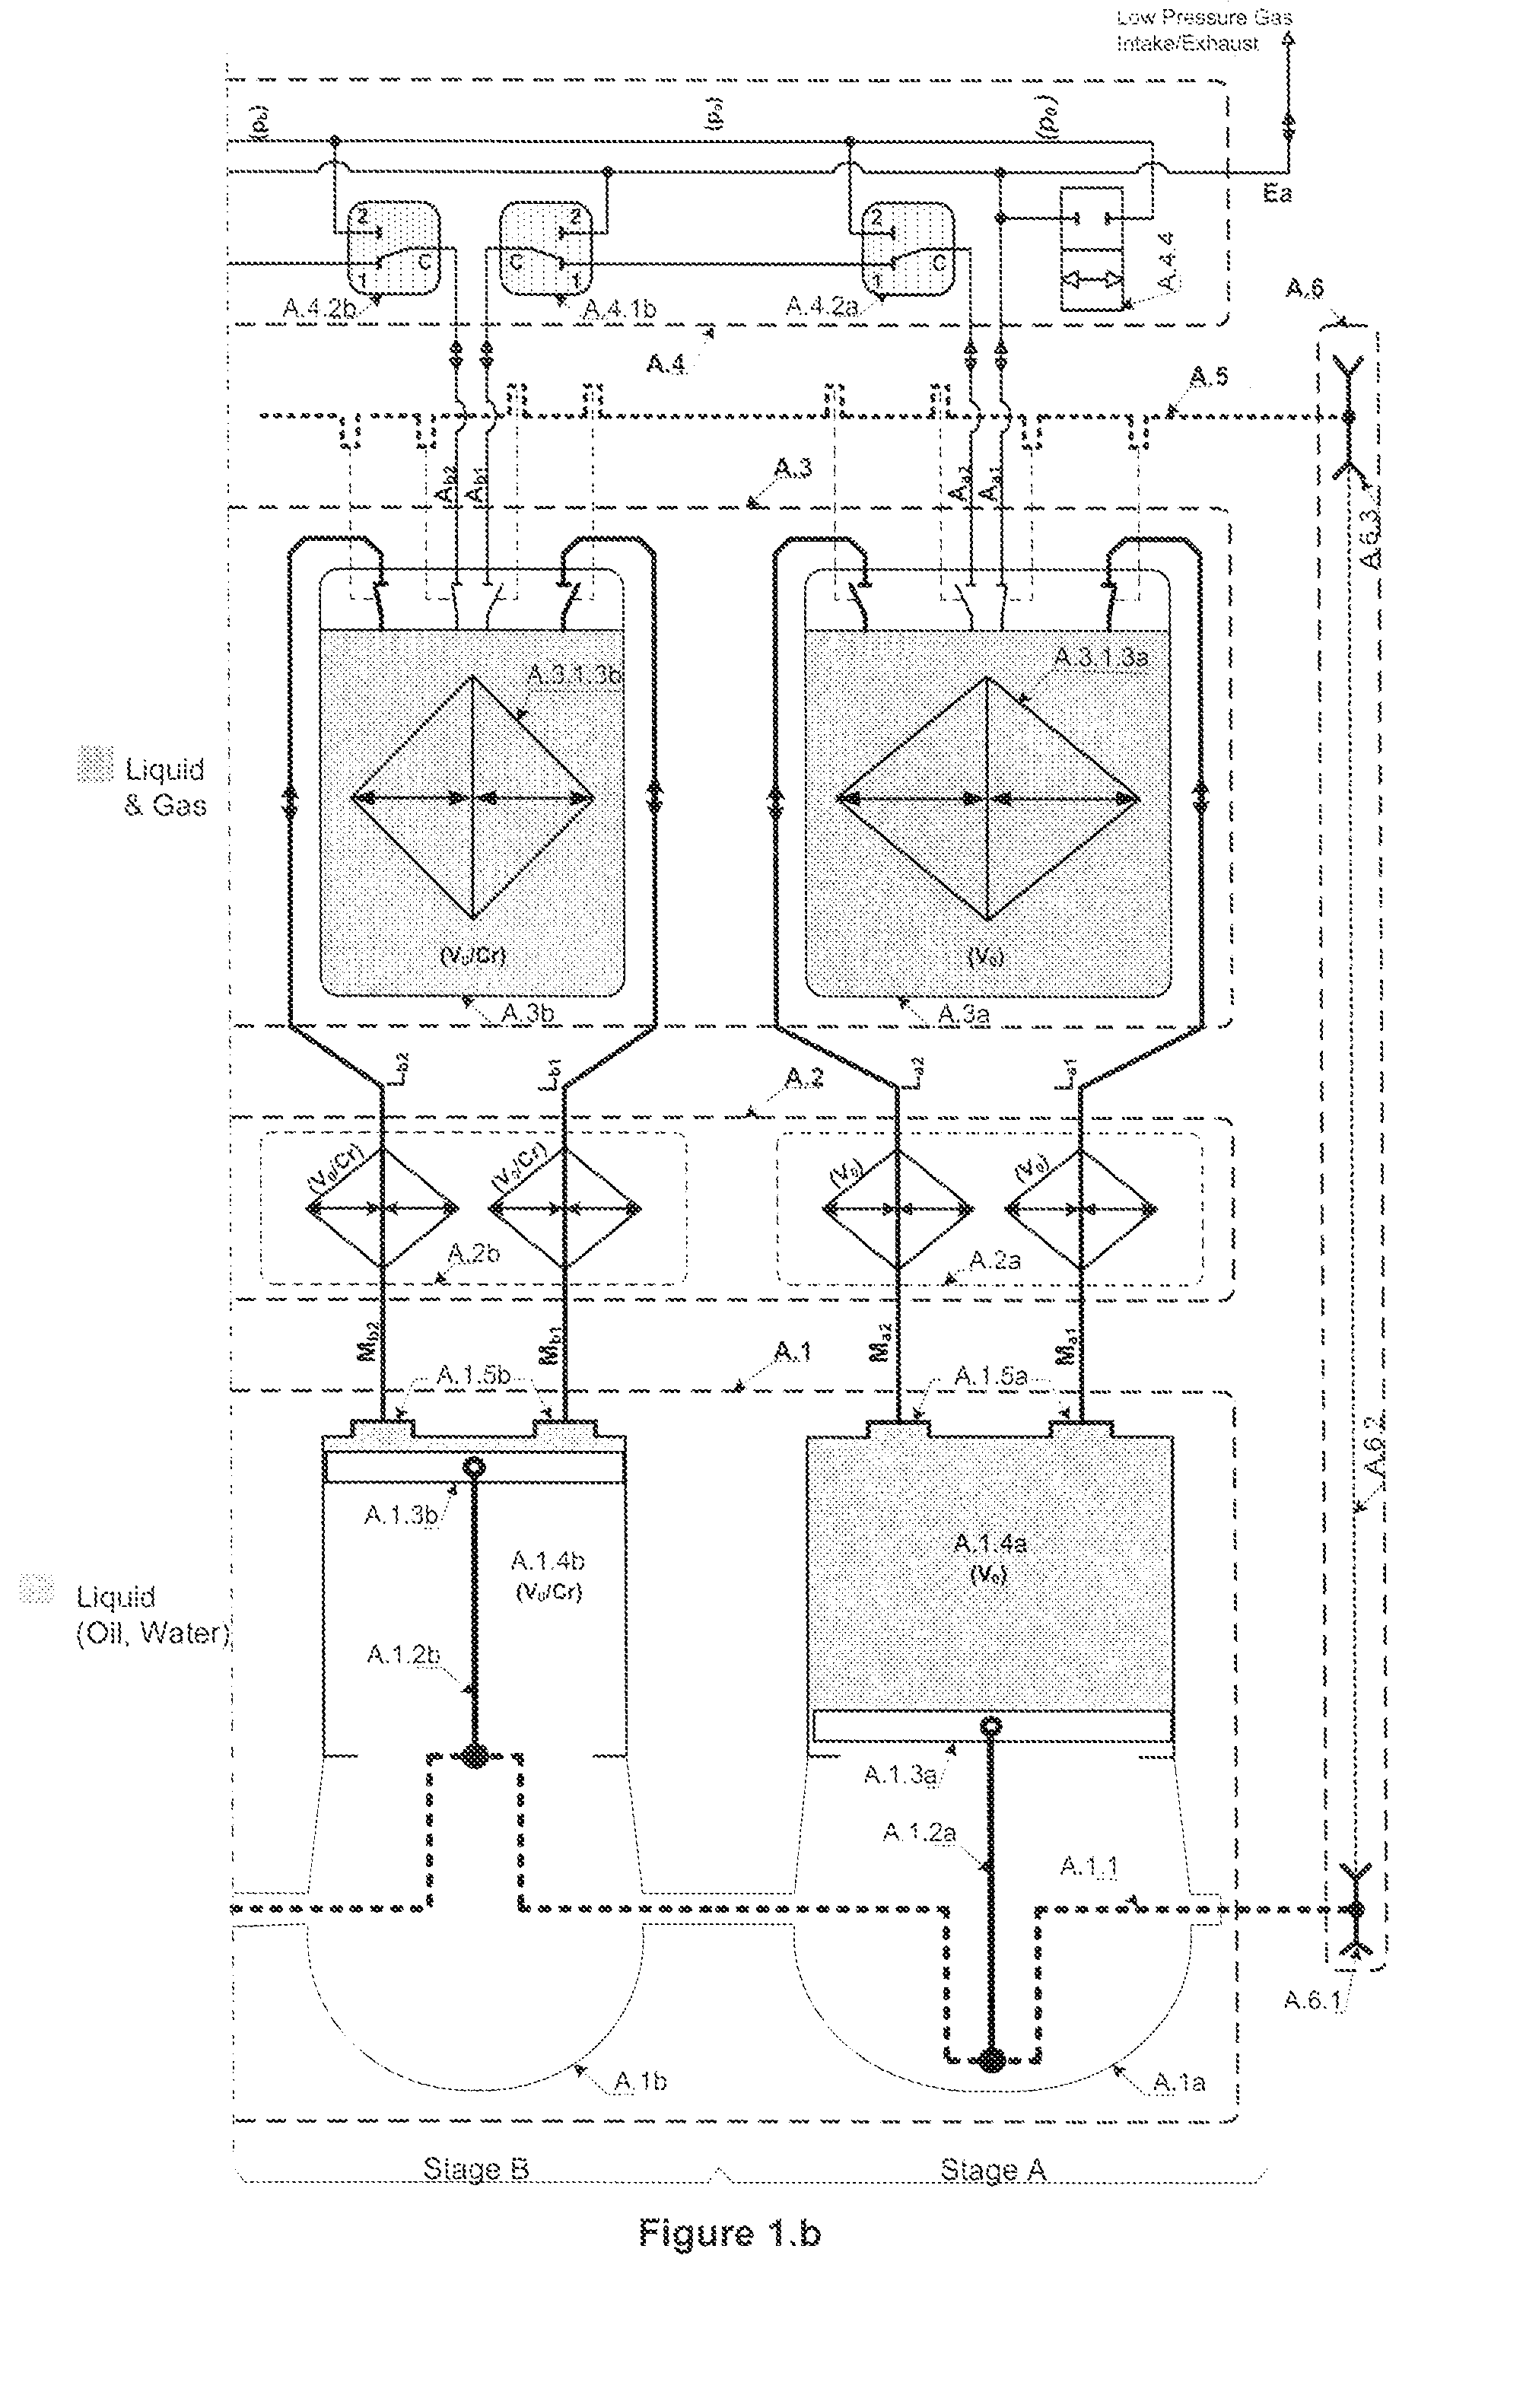 Multistage Hydraulic Gas Compression/Expansion Systems and Methods